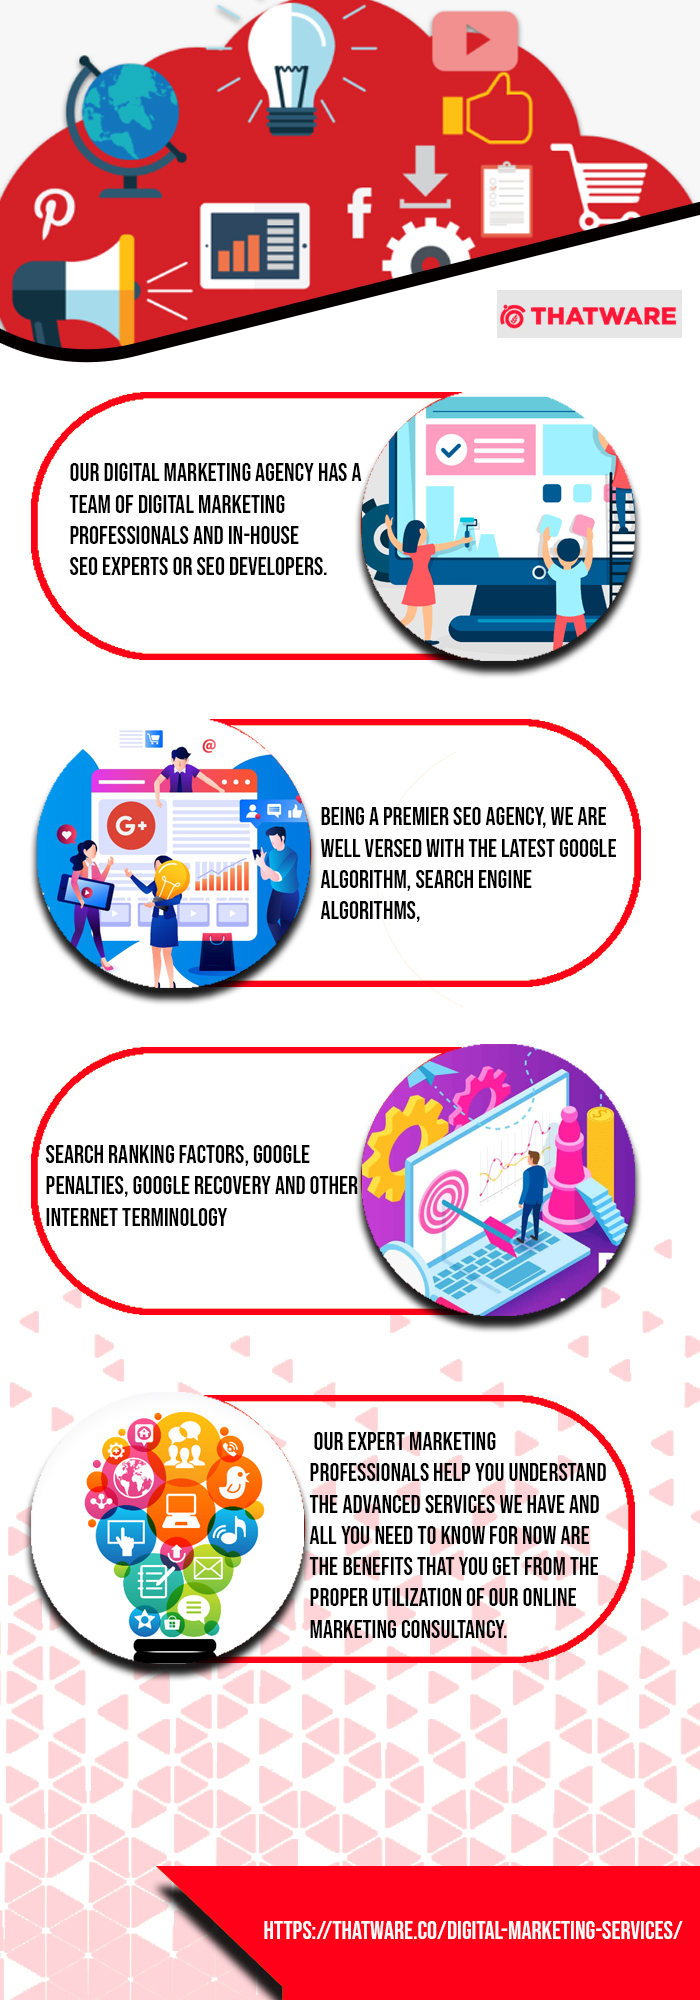 Top Advanced Digital Marketing Agency in India – ThatWare